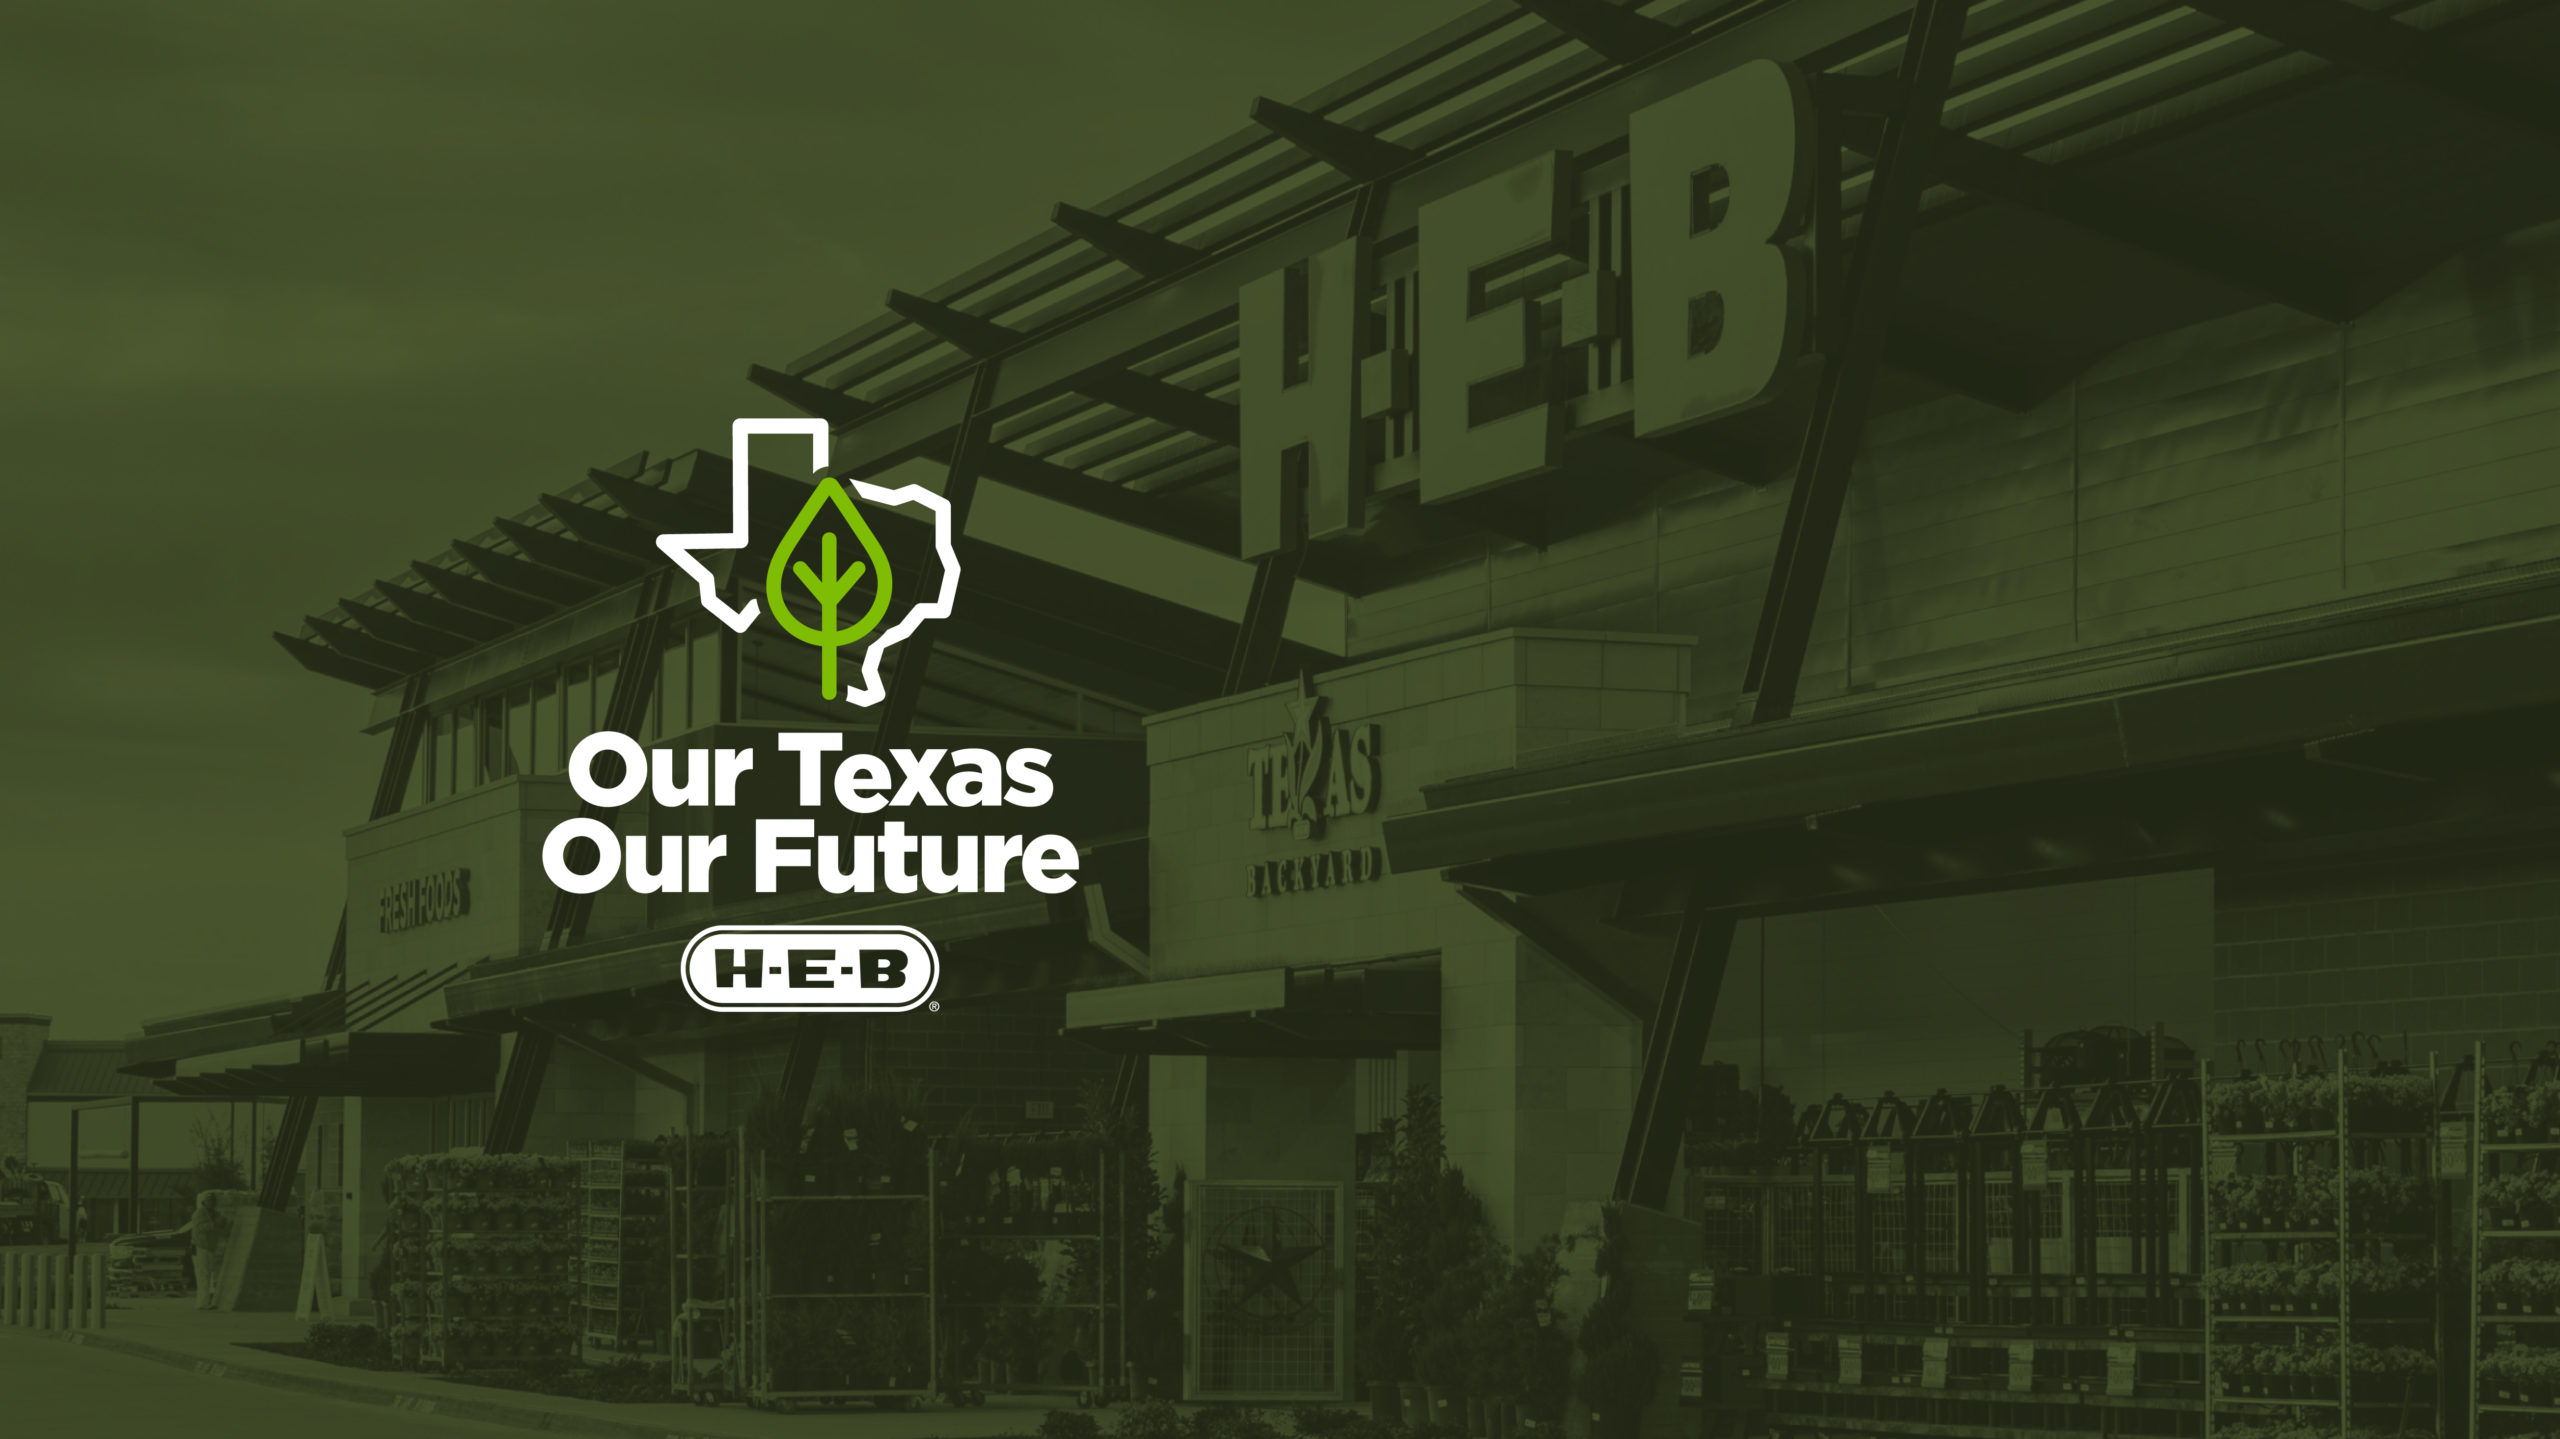 H-E-B's “Store Drop-Off” Recycling Program Gives Plastic a Second Life